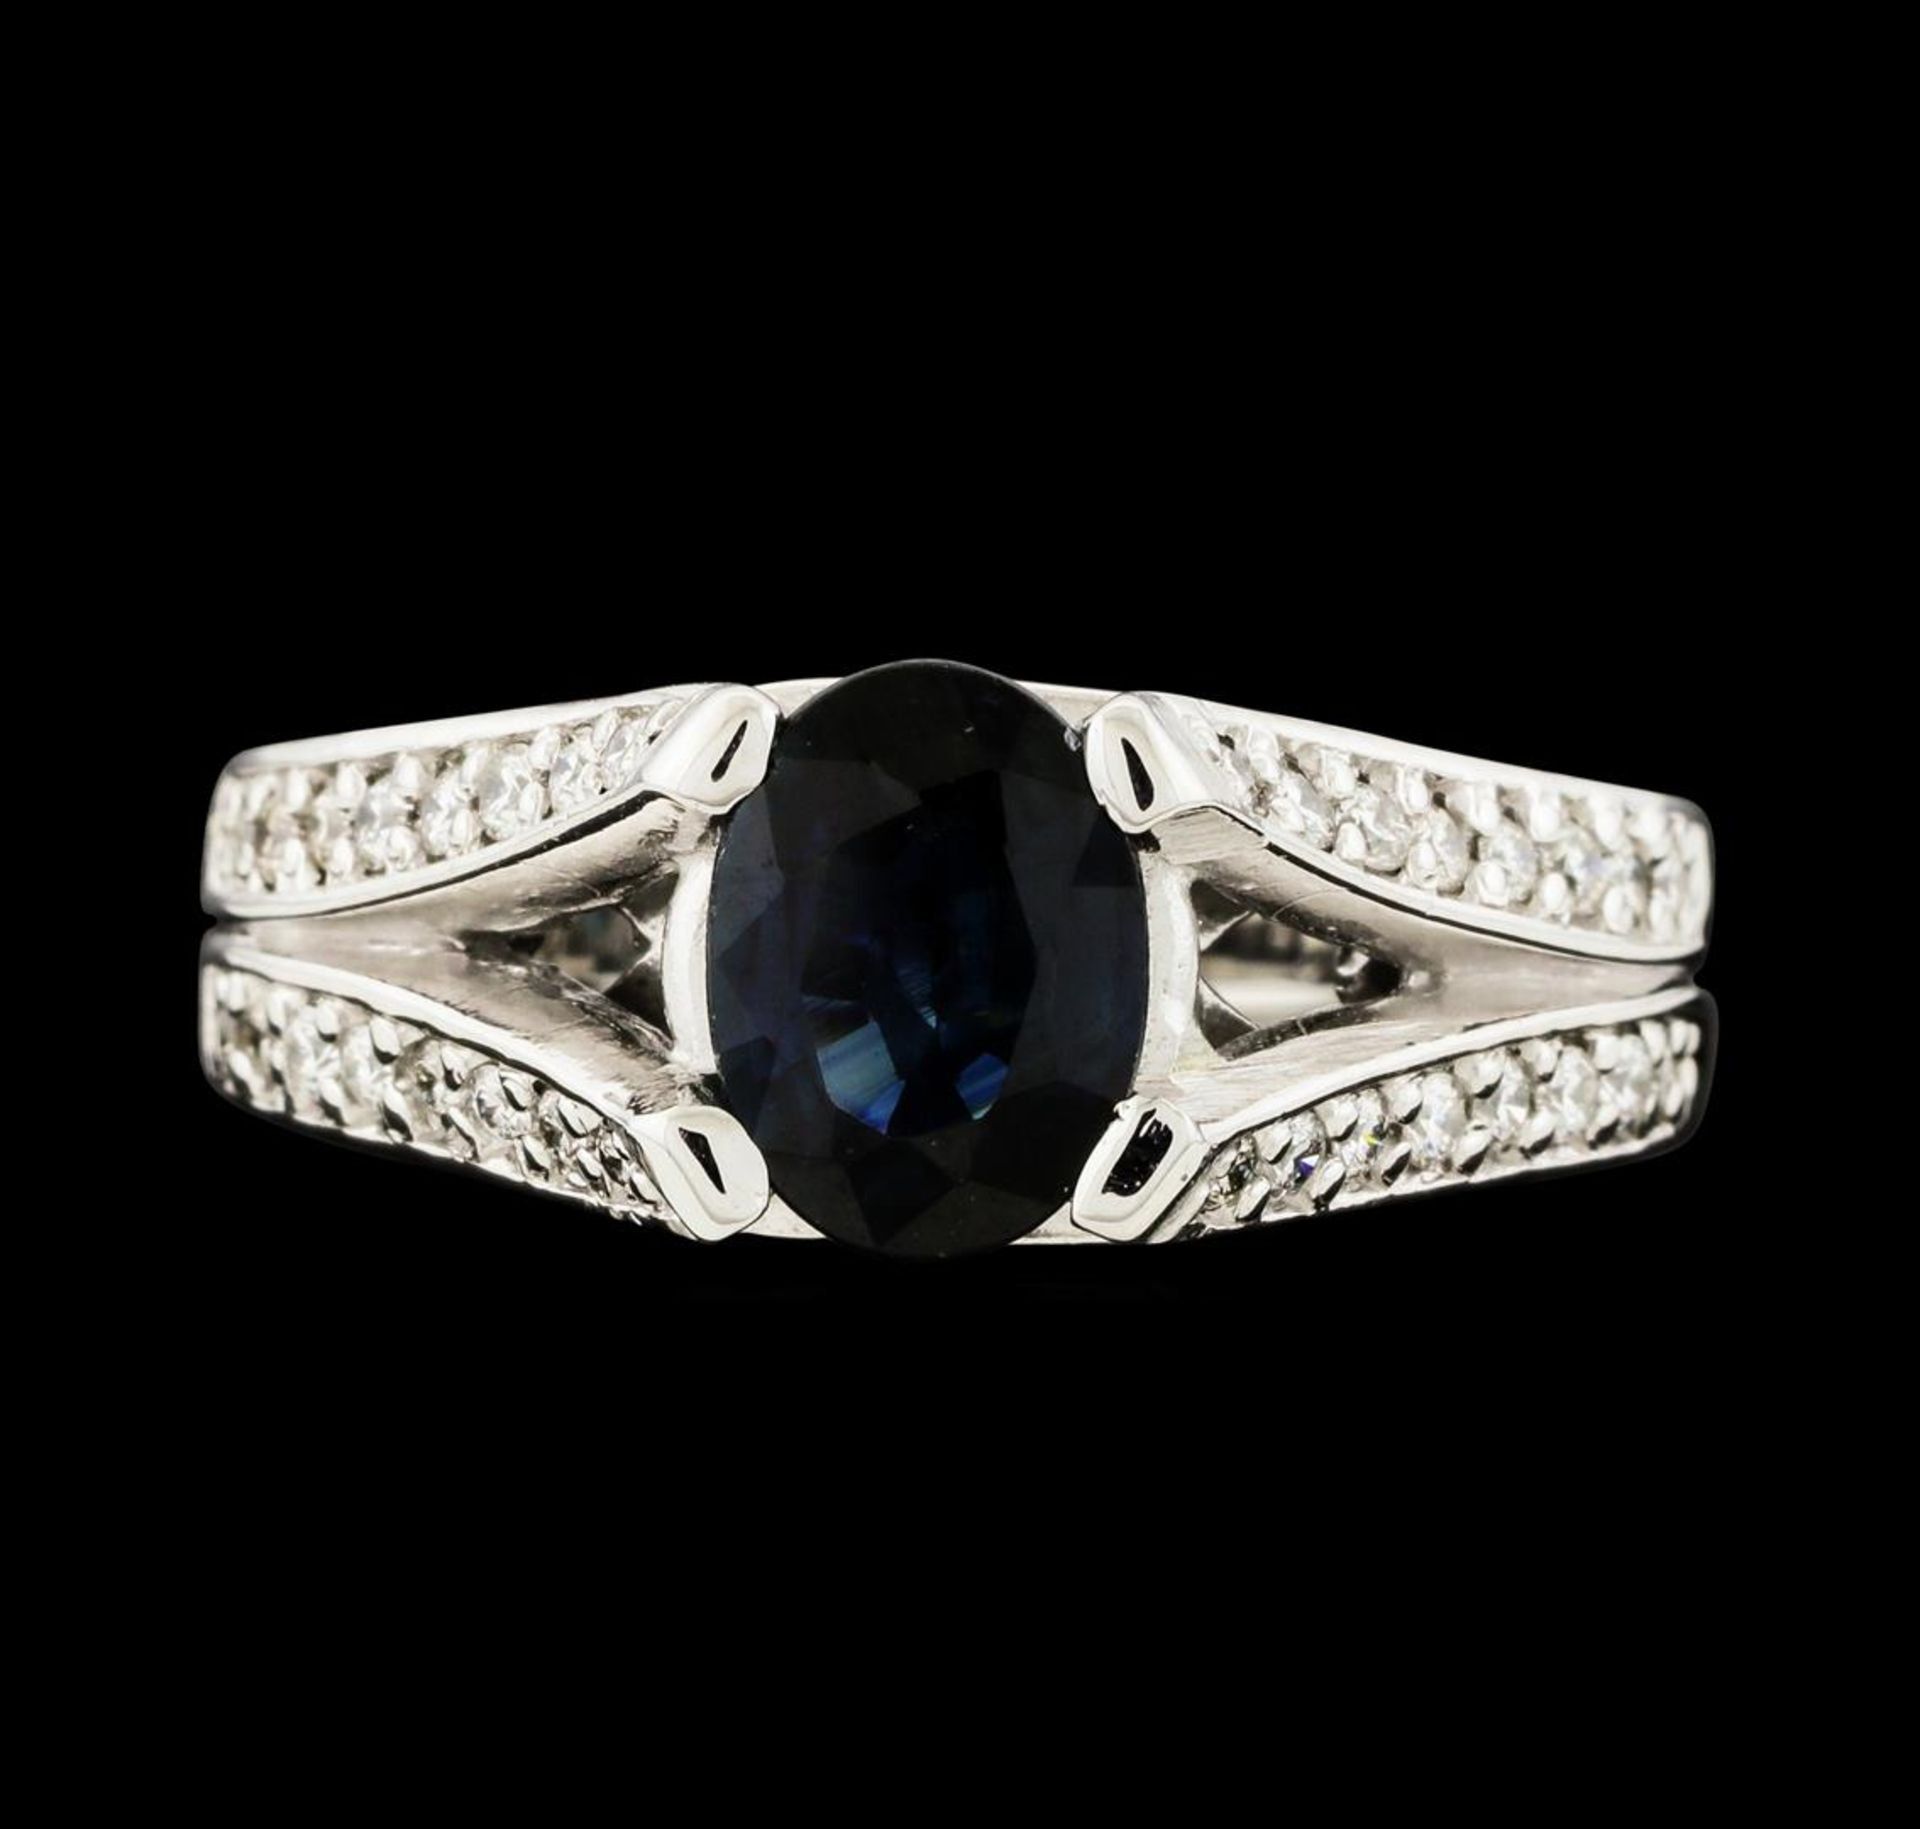 1.61 ctw Sapphire and Diamond Ring - 14KT White Gold - Image 3 of 7